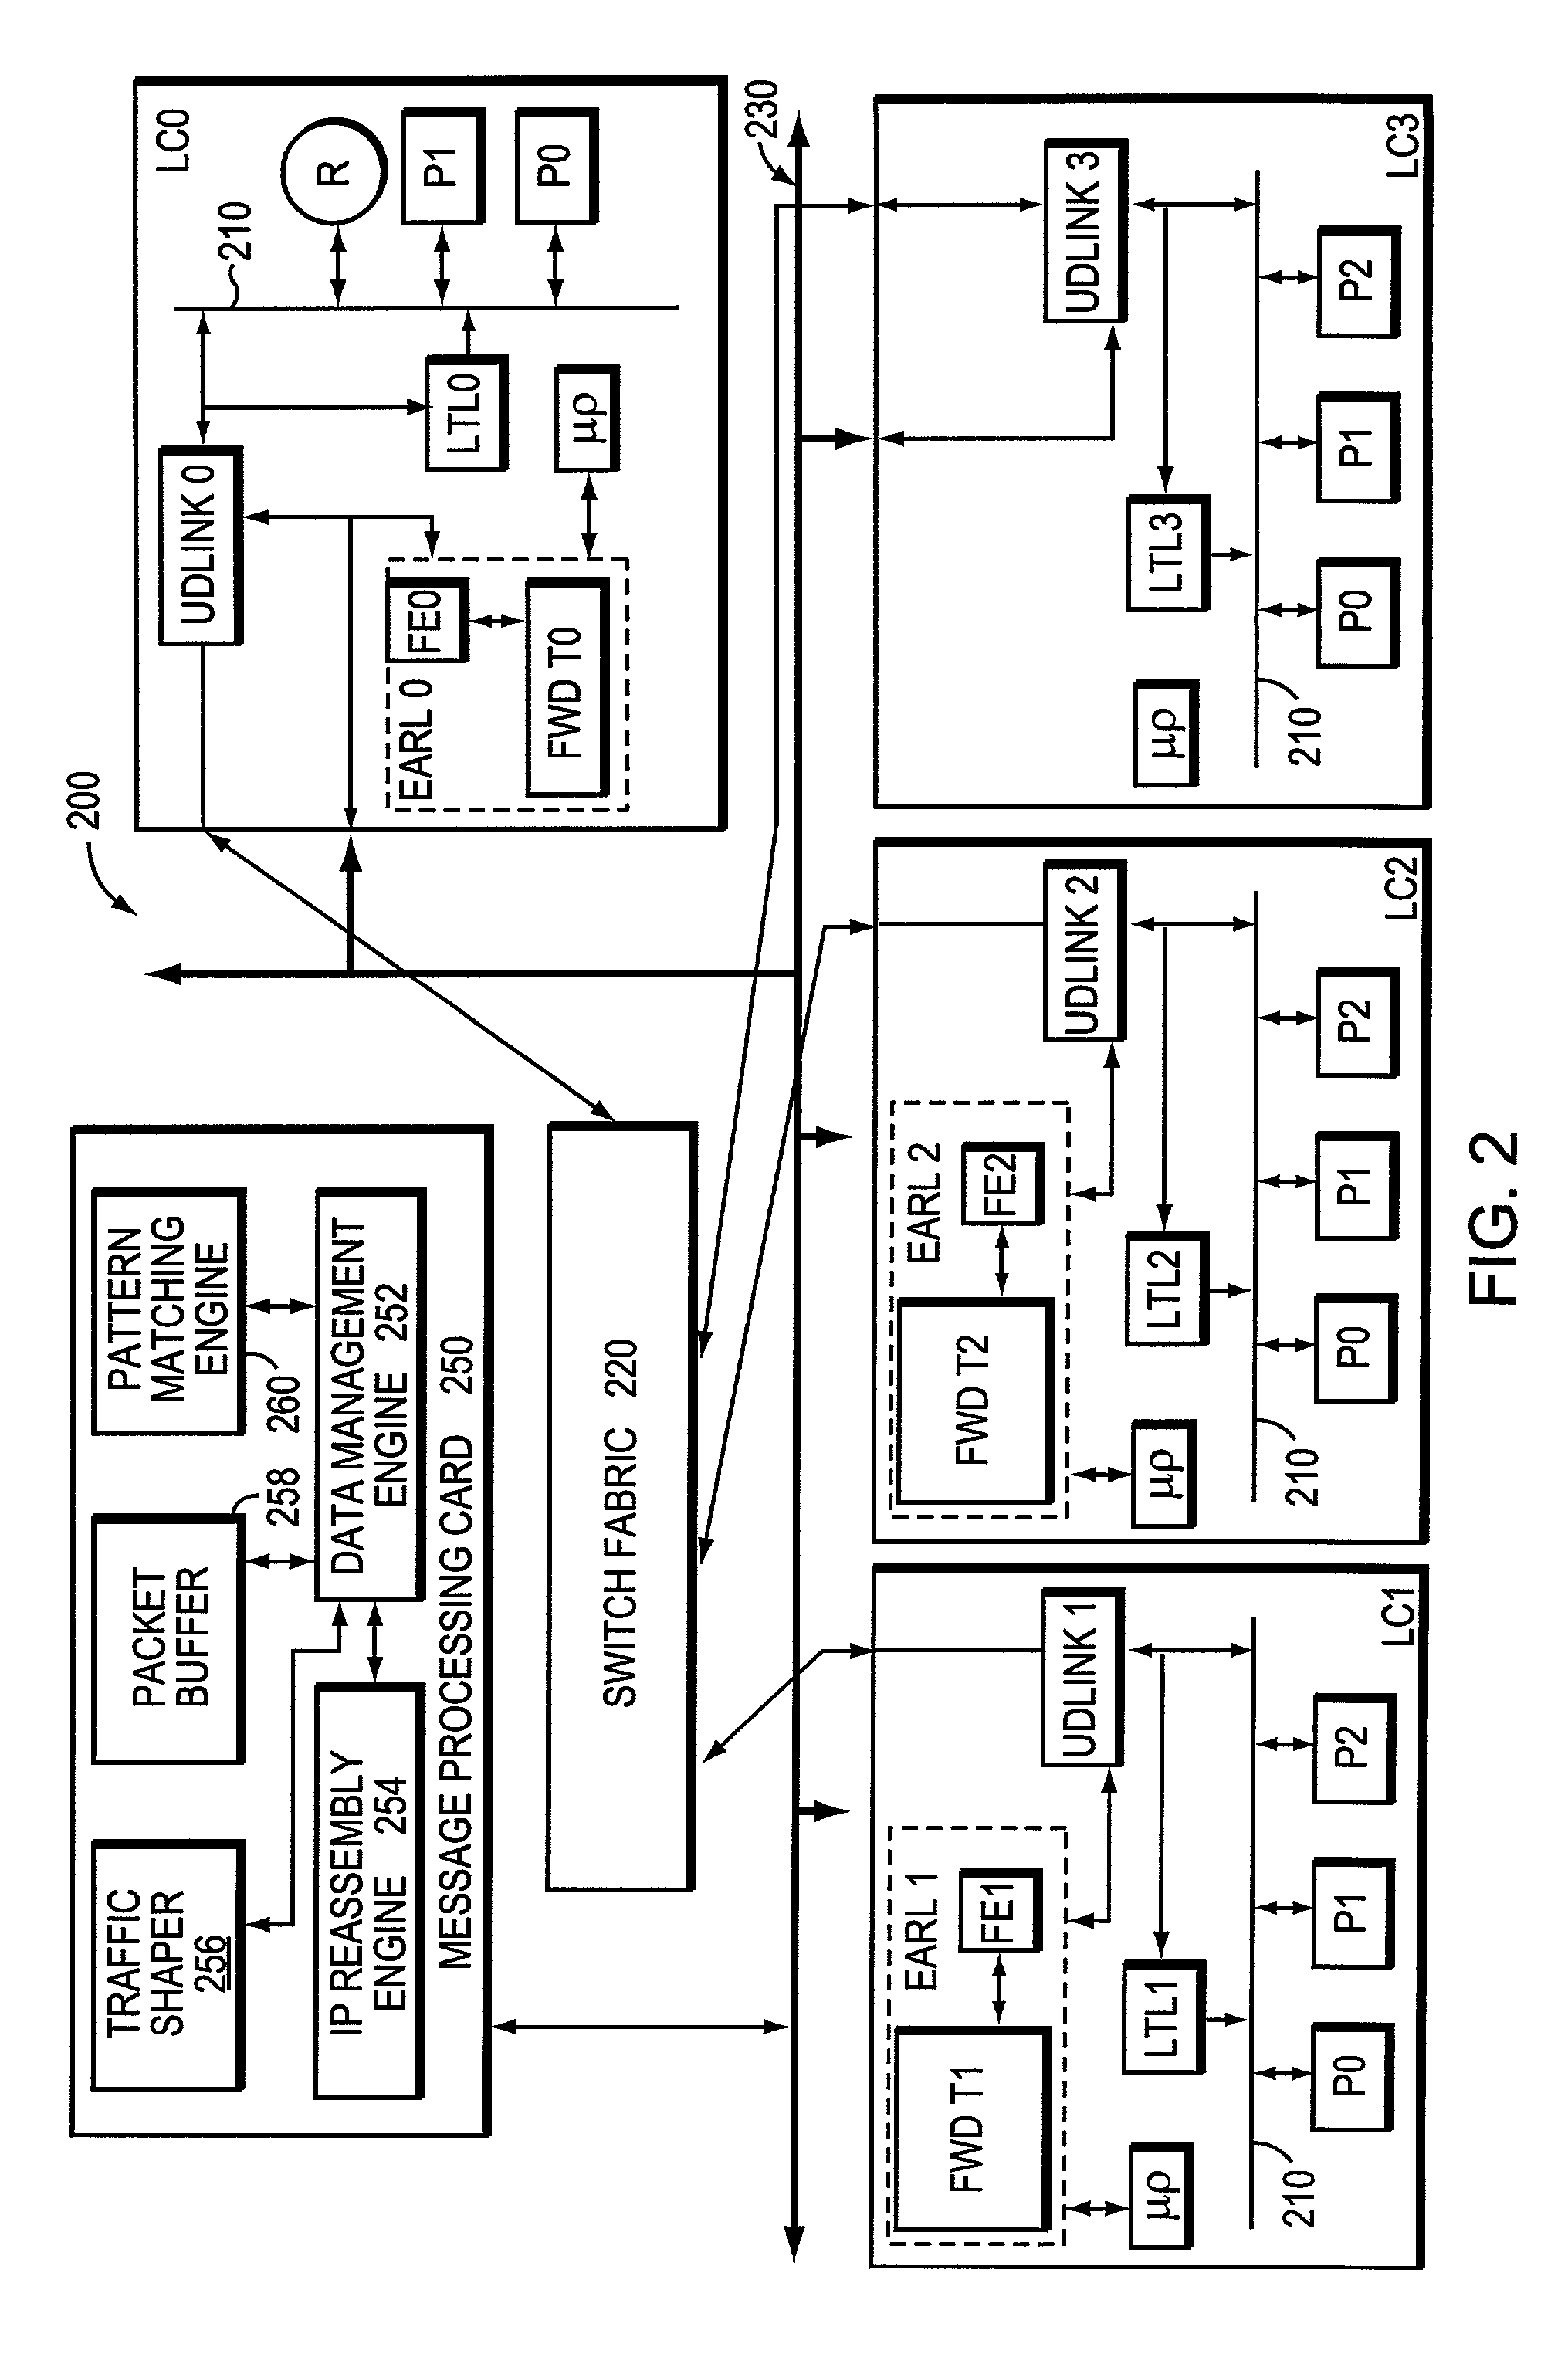 System and method for performing regular expression matching with high parallelism